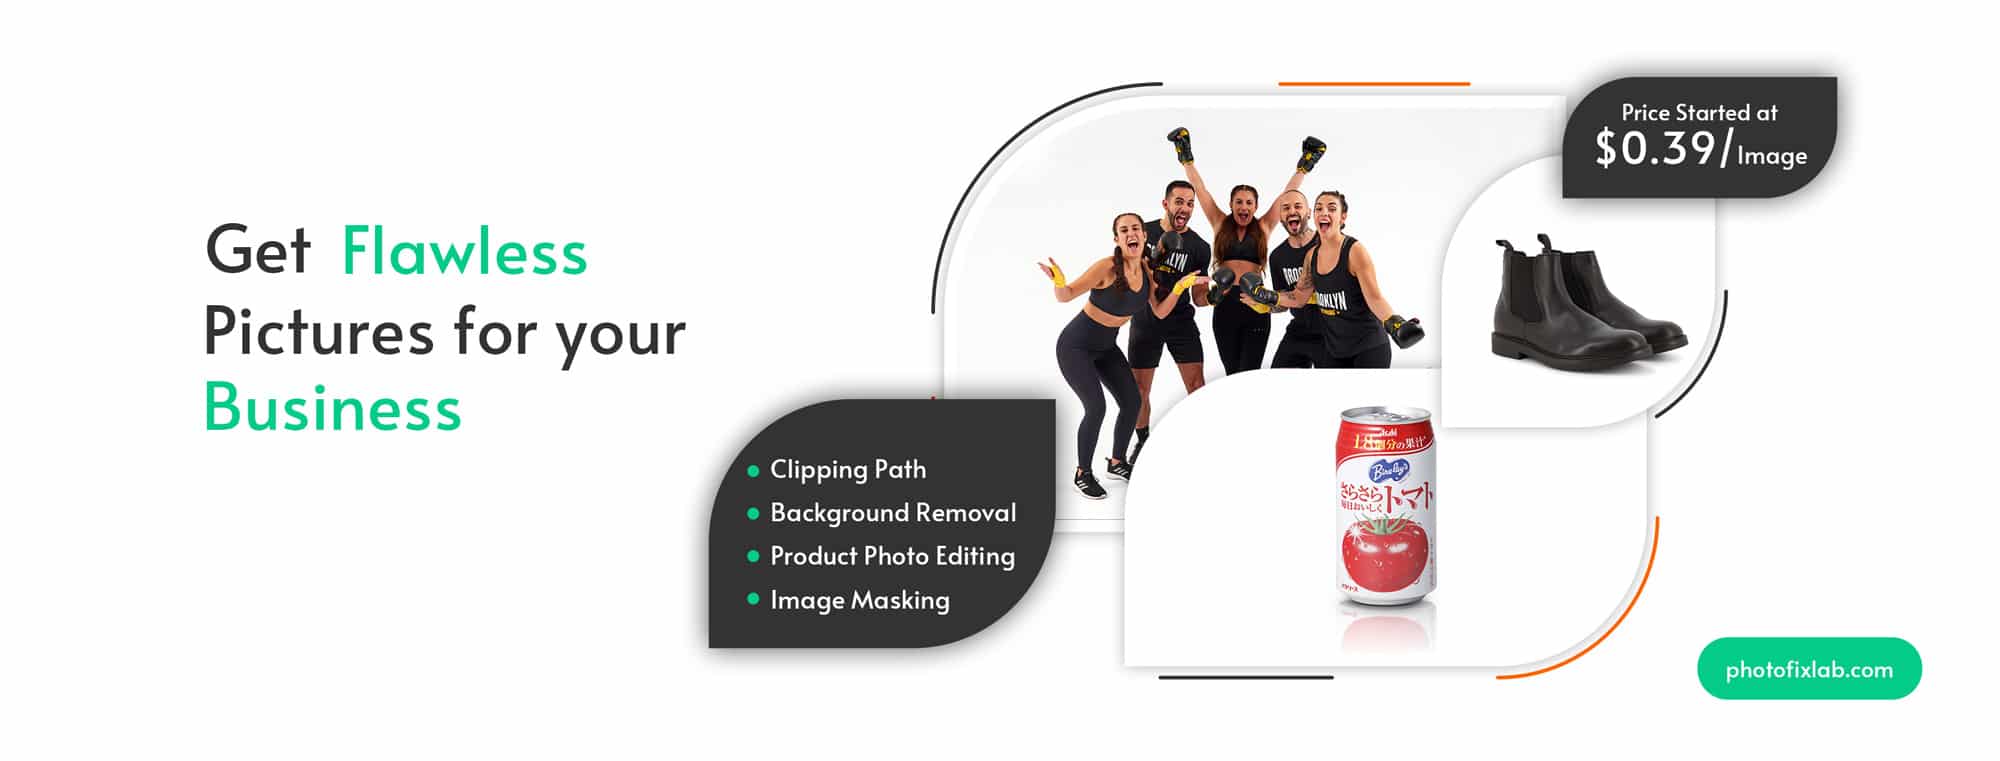 professional photo editing services banner with all products